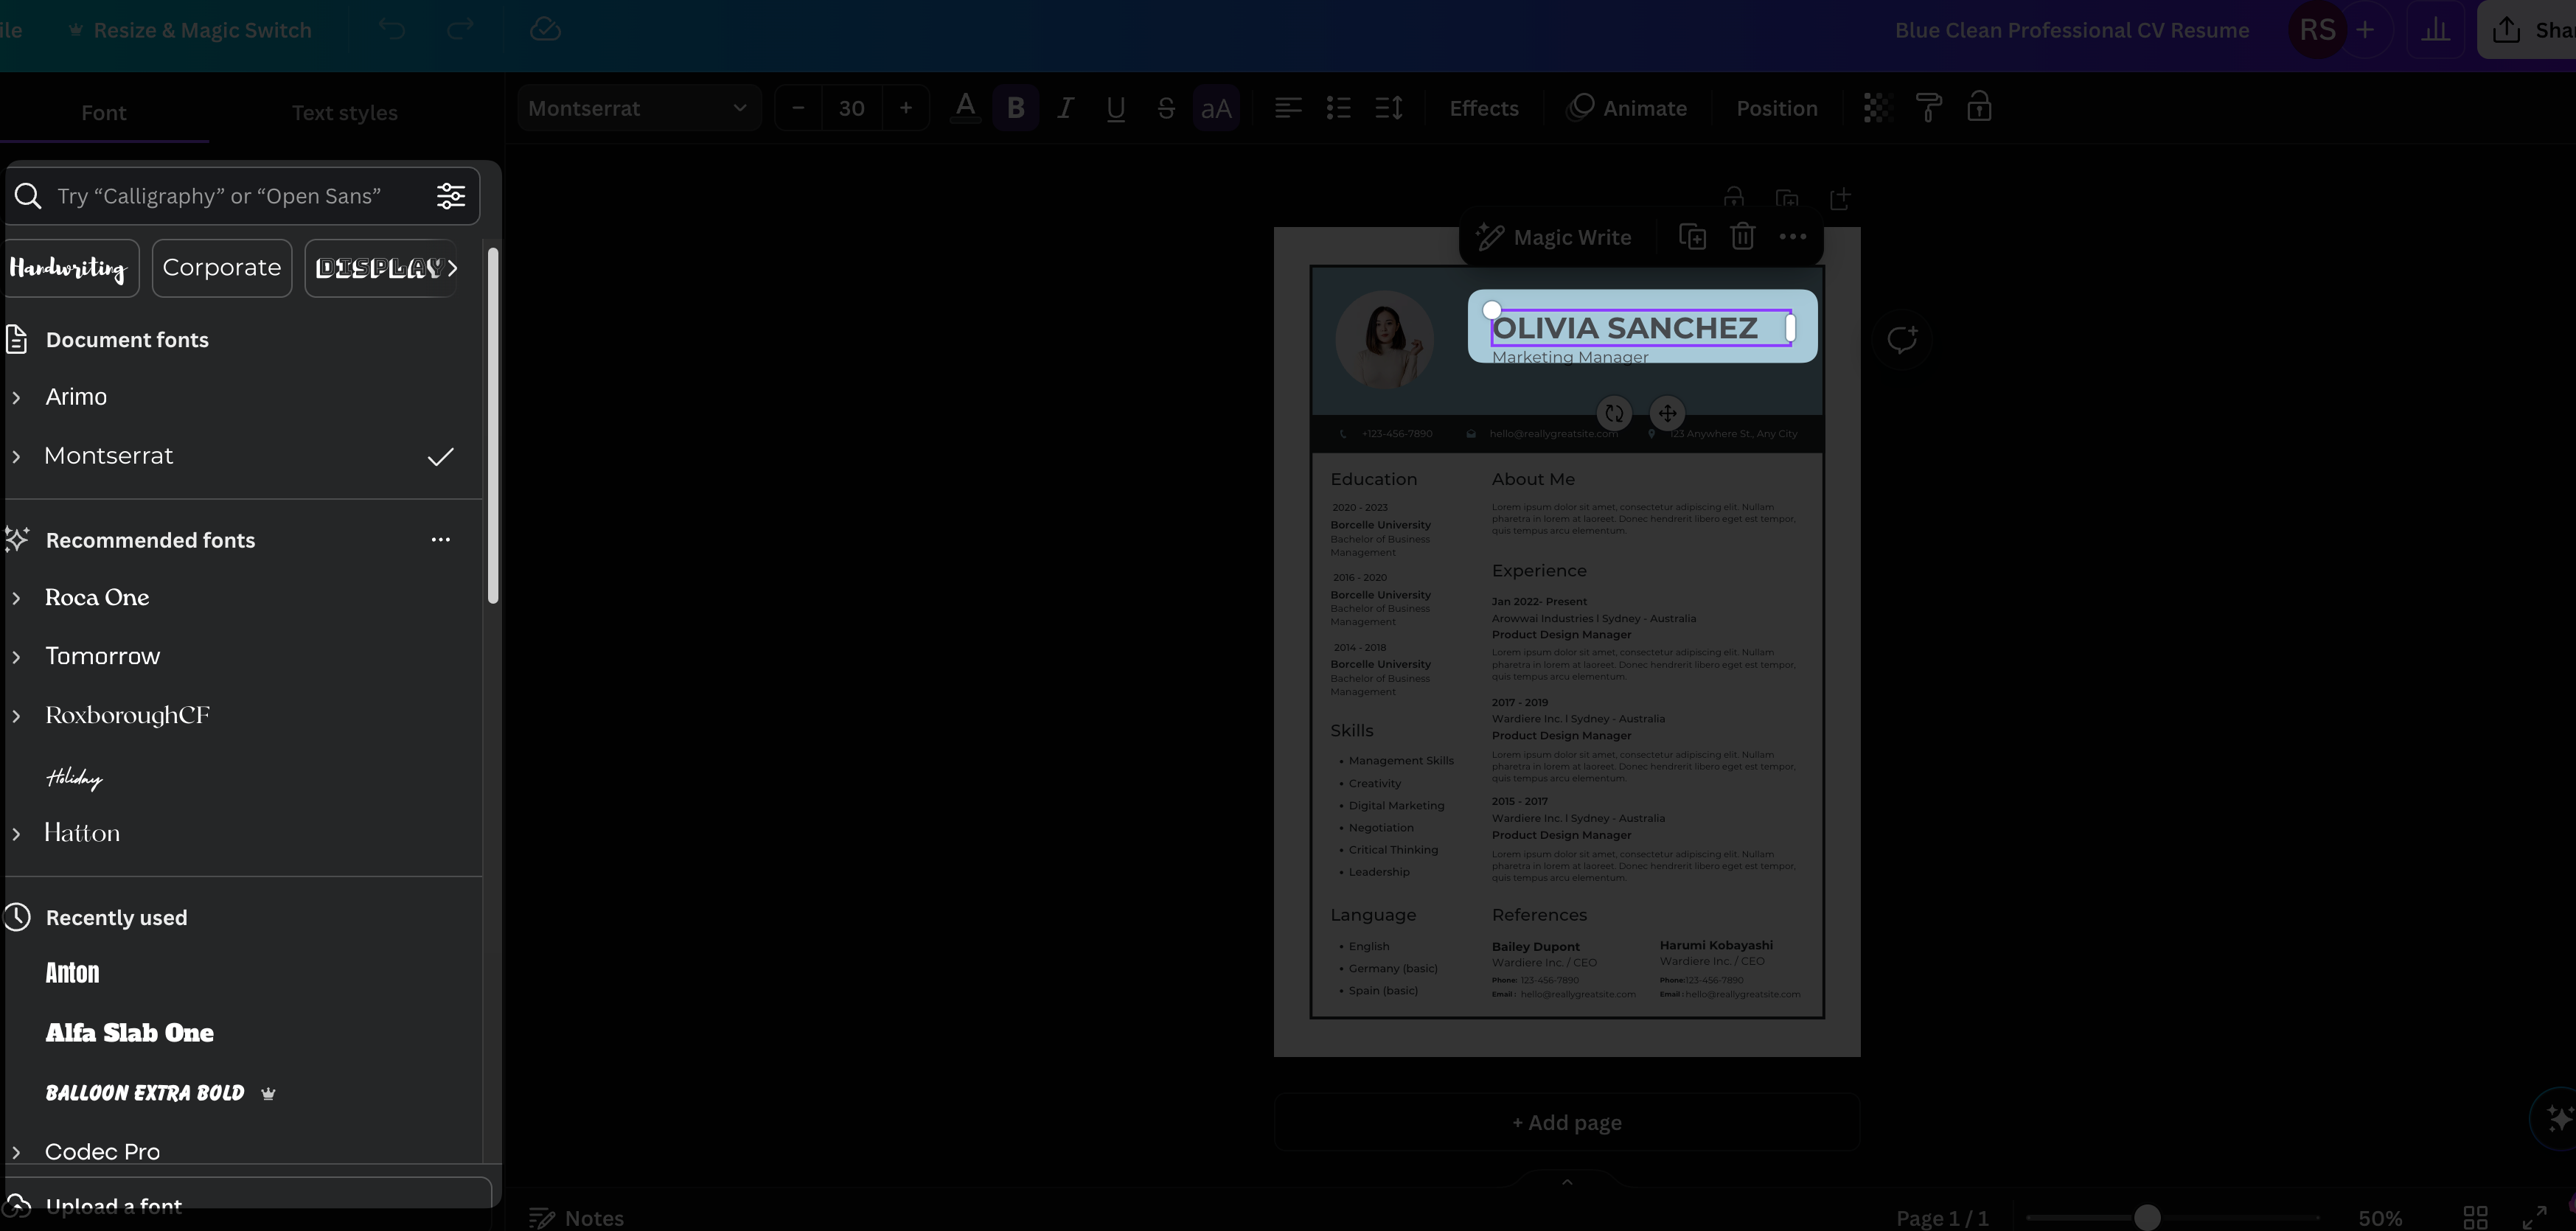 How to Create a Resume in Canva with AI (Step-by-step Guide) 21